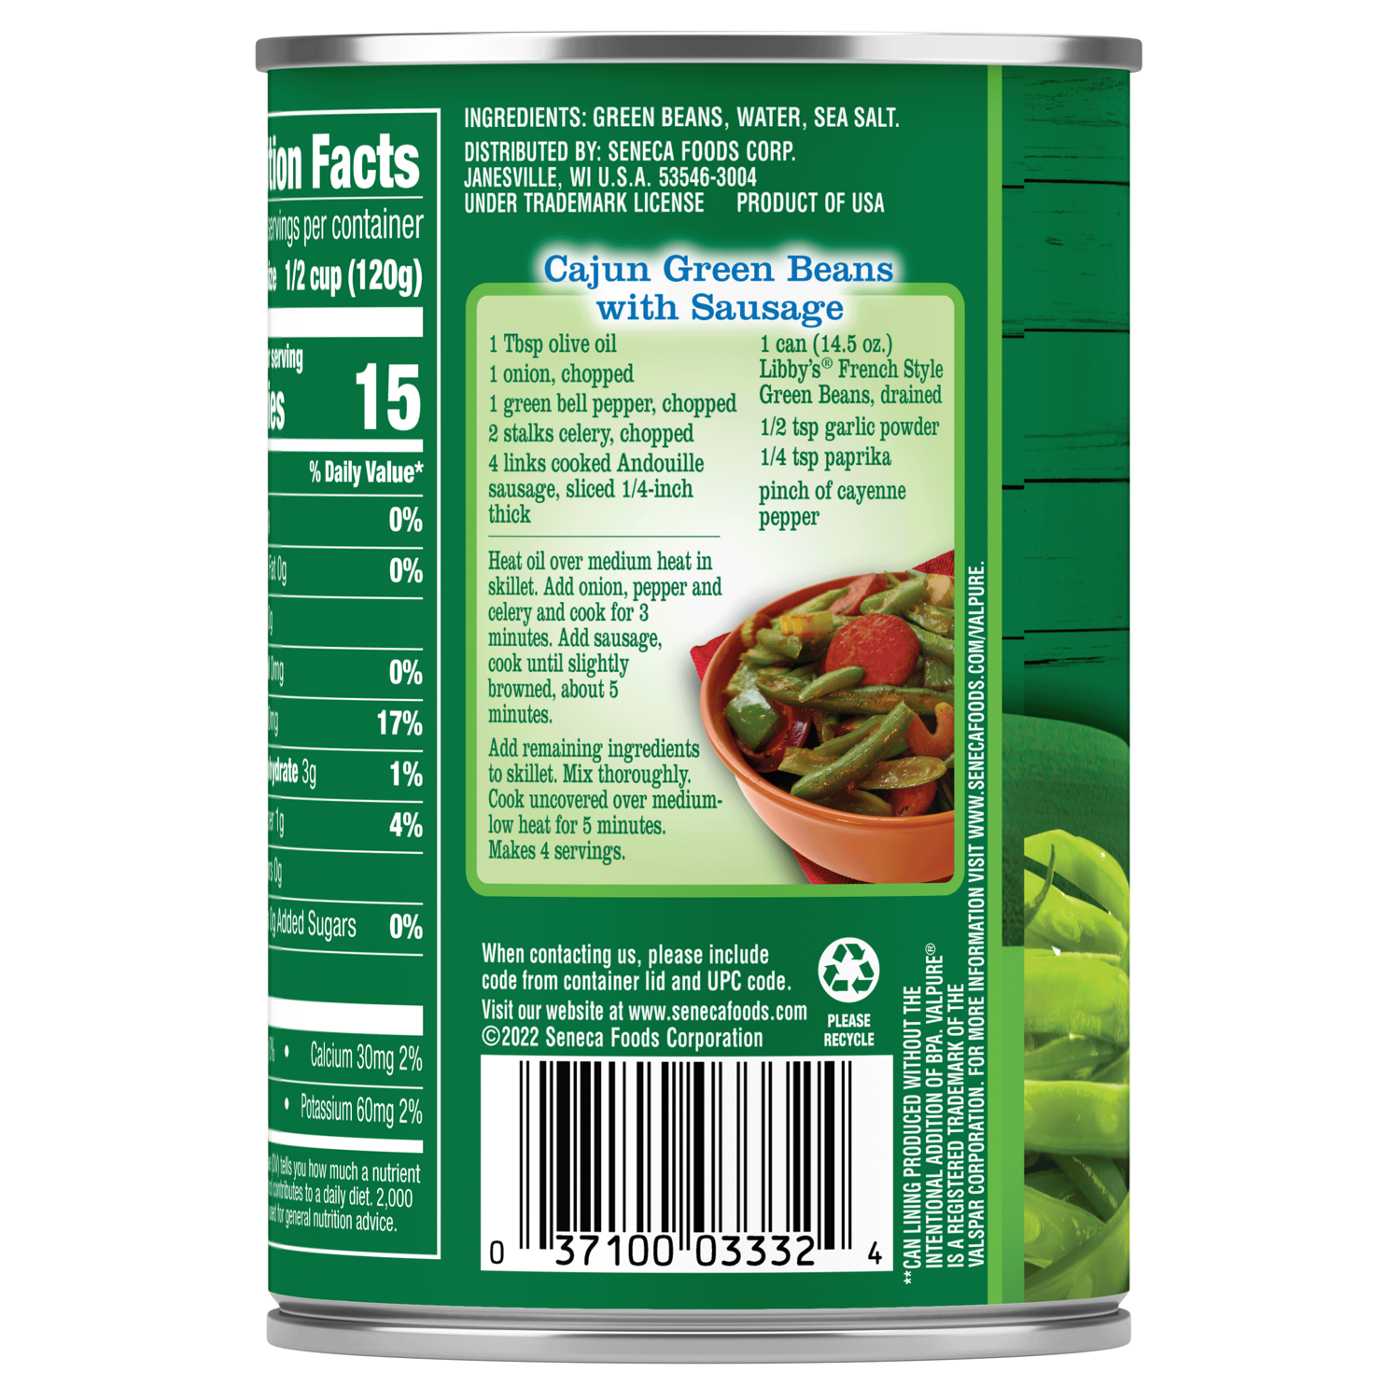 Libby's French Style Green Beans; image 4 of 4